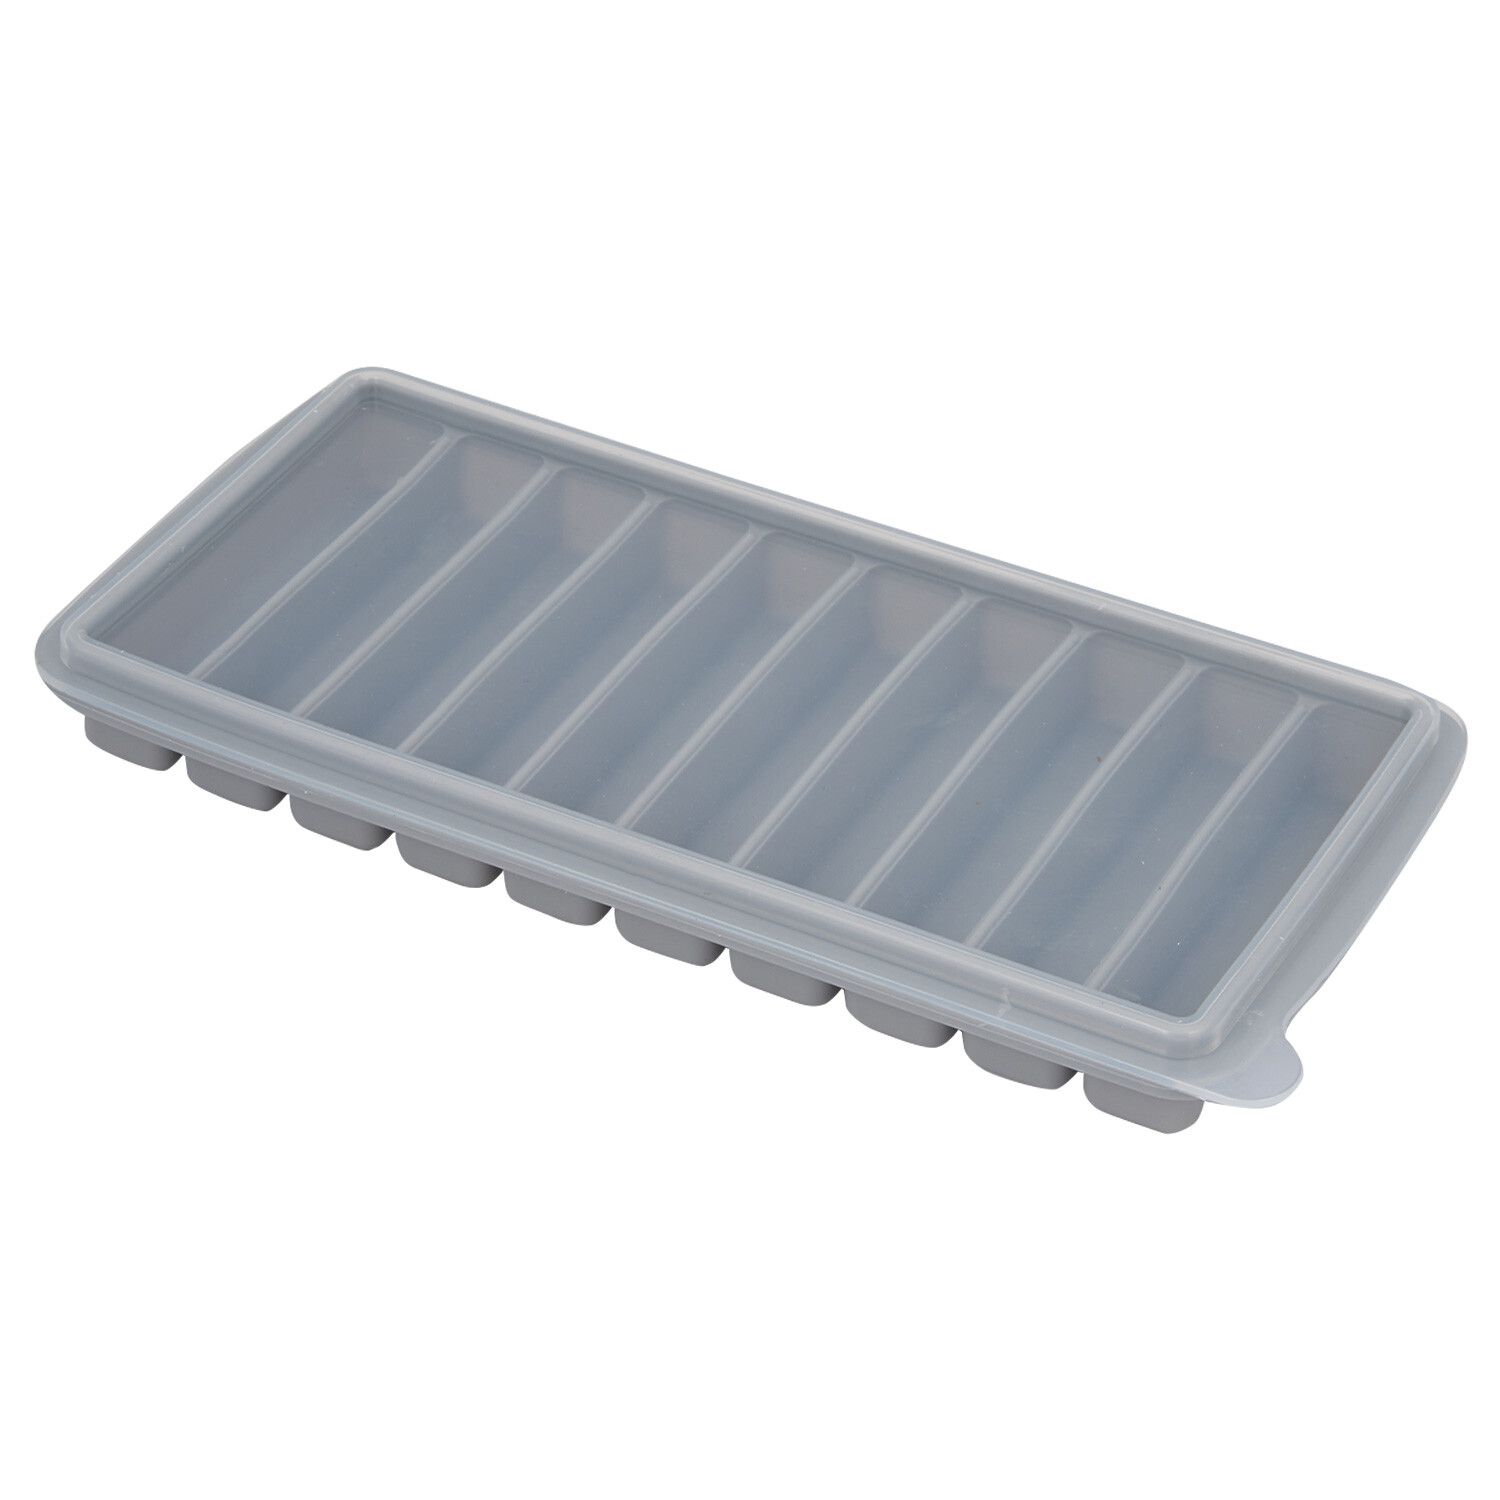 10 Bar Silicone Ice Mould with Lid - Grey Image 1